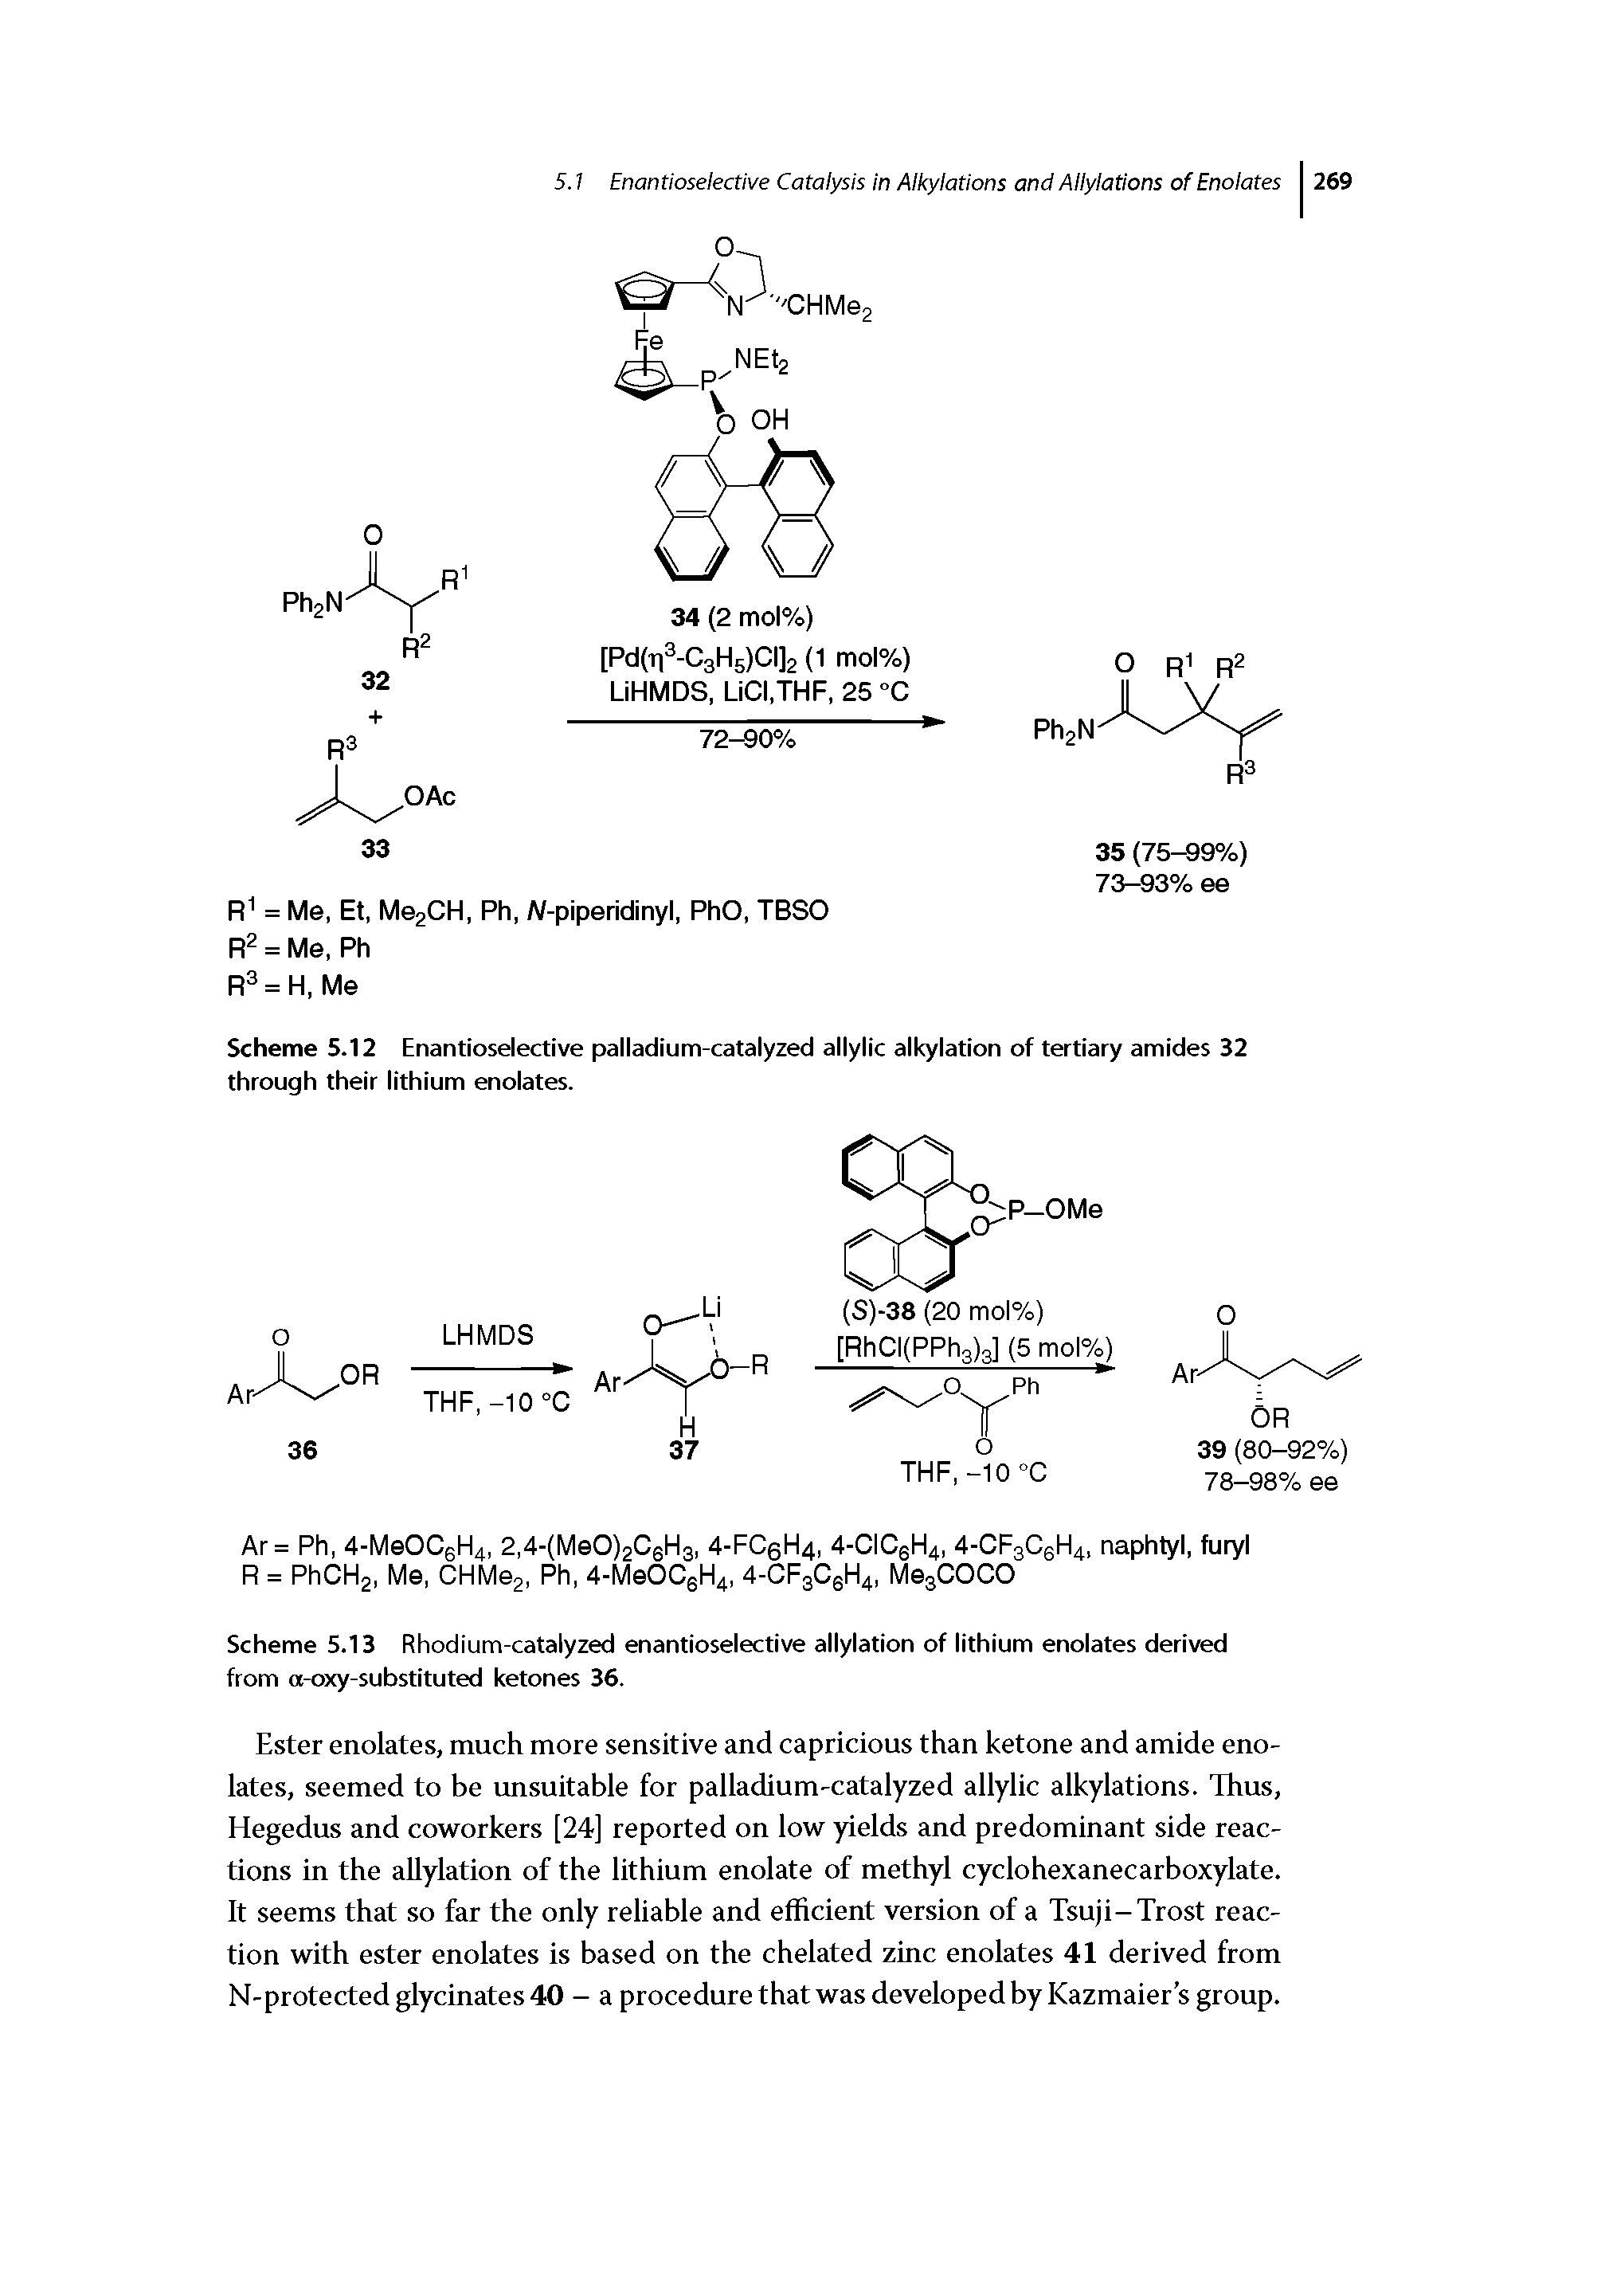 Scheme 5.13 Rhodium-catalyzed enantioselective allylation of lithium enolates derived from a-oxy-substituted ketones 36.